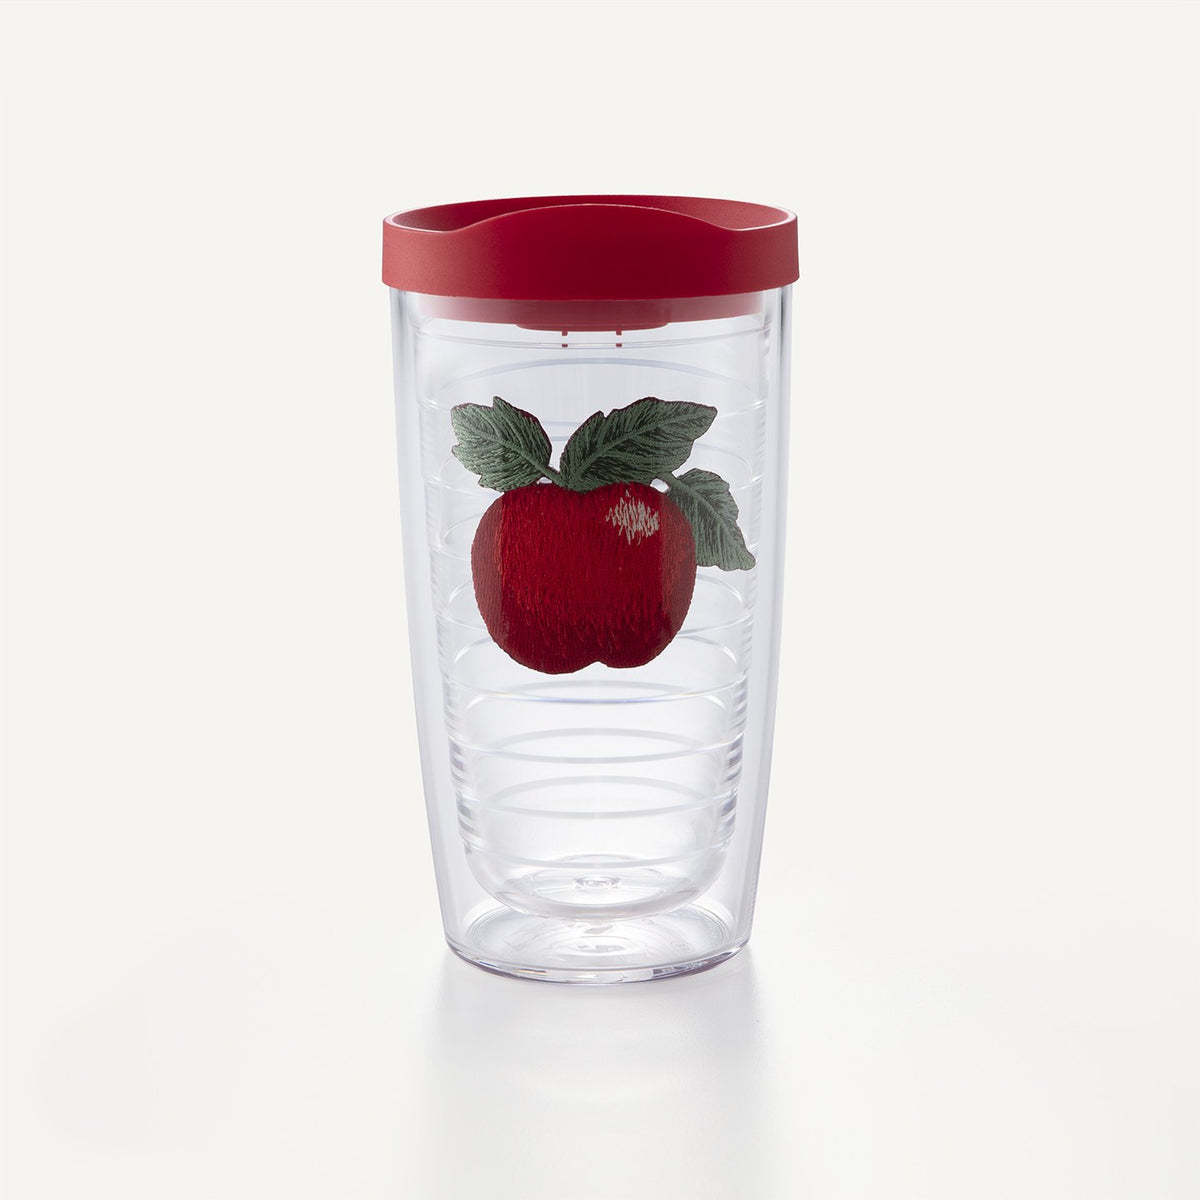 Tervis tumbler with red apple printed on it